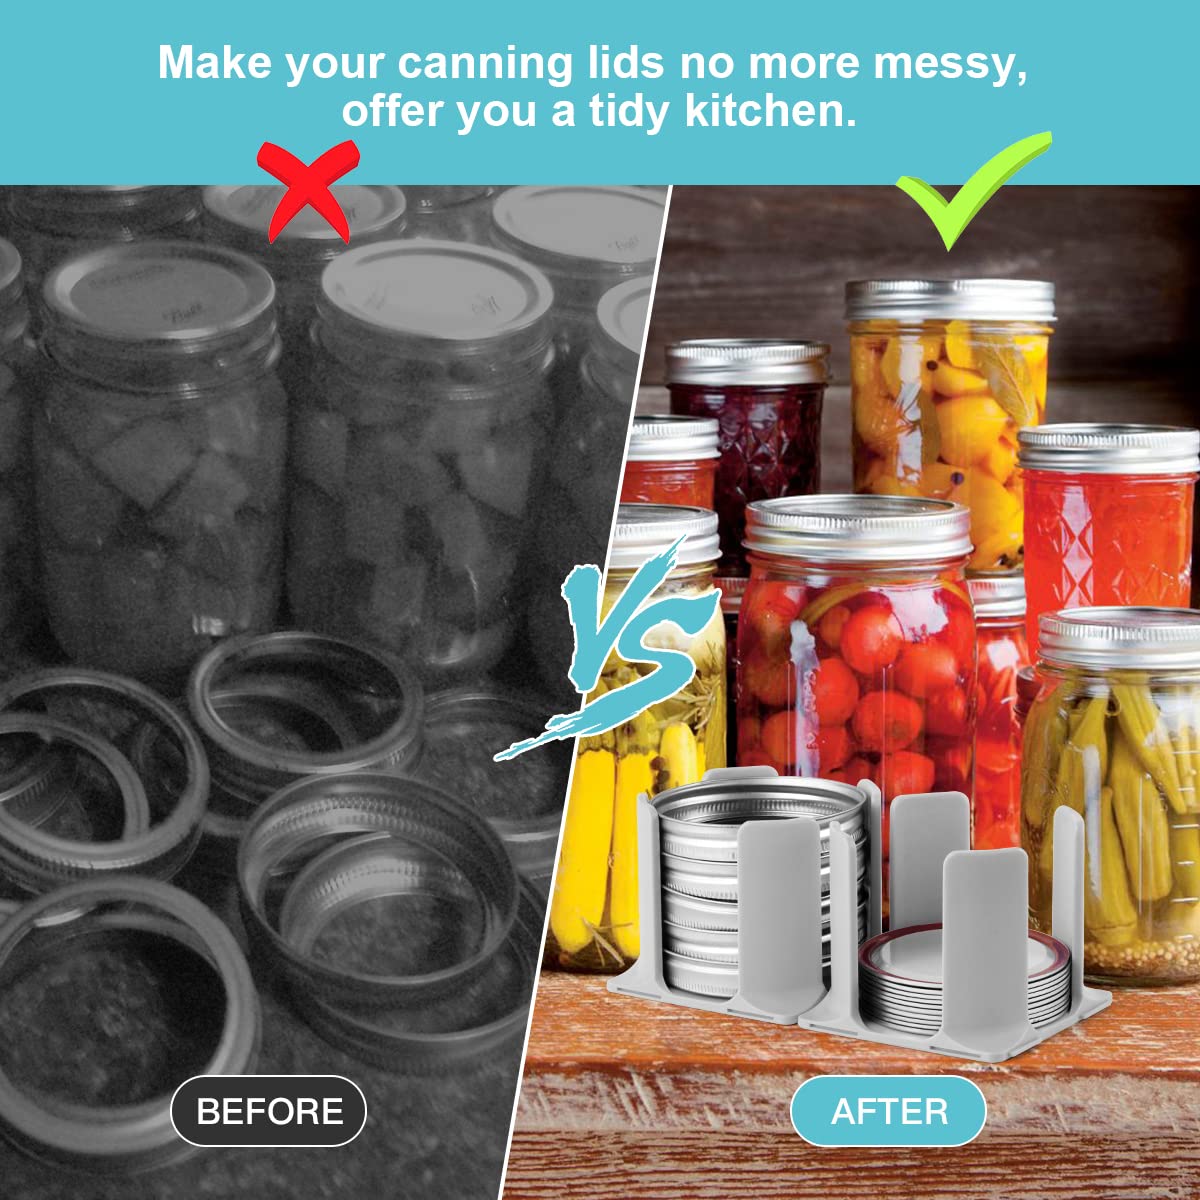 With the canning lids and rings rack, it will make your ball & kerr jar canning lids no more messy, offer you a tidy kitchen